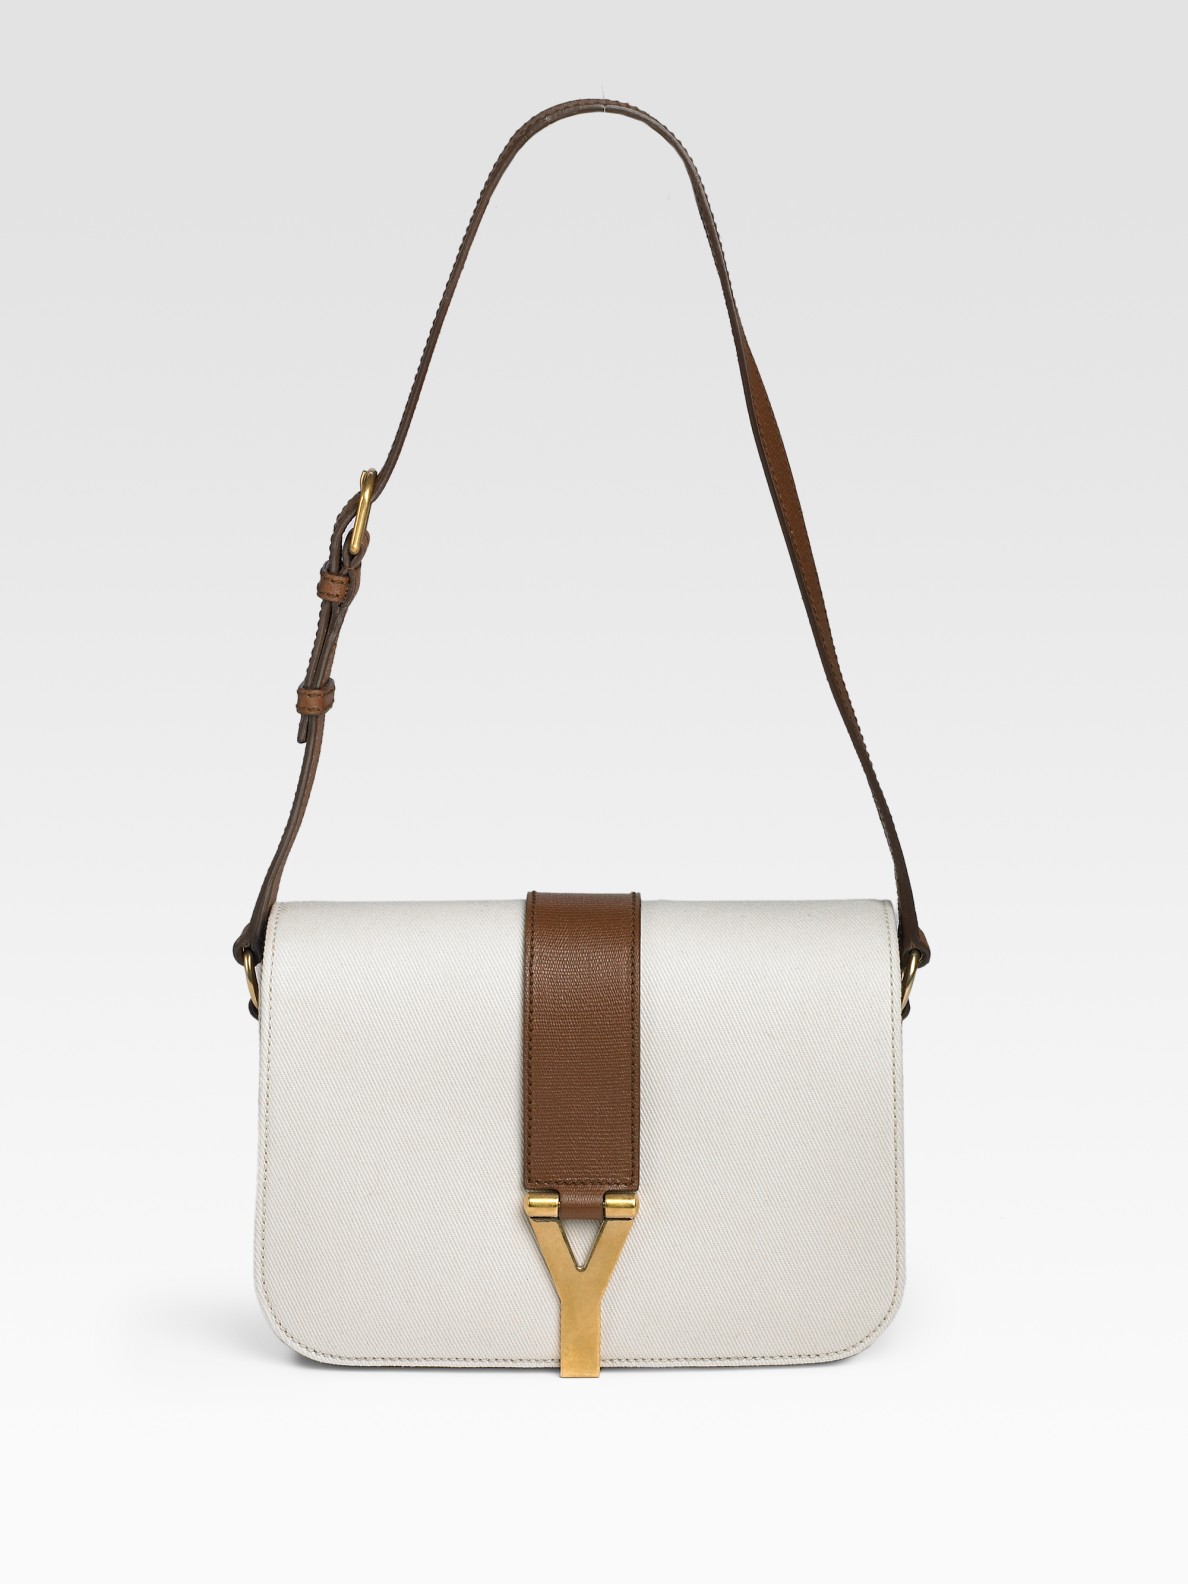 Saint laurent Chyc Canvas and Leather Flap Bag in White | Lyst